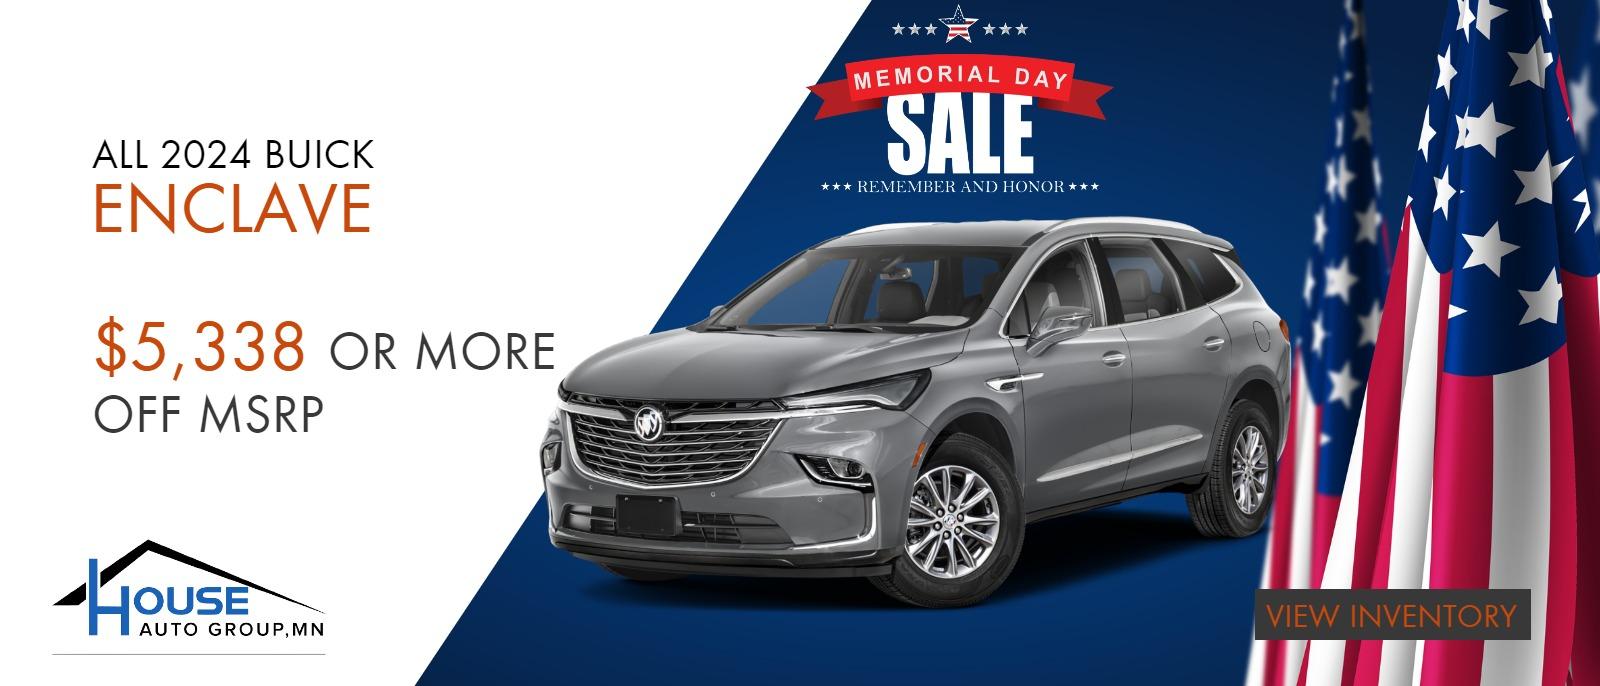 ALL 2024 Buick Enclave SUVs - $5,338 Or More Off MSRP!